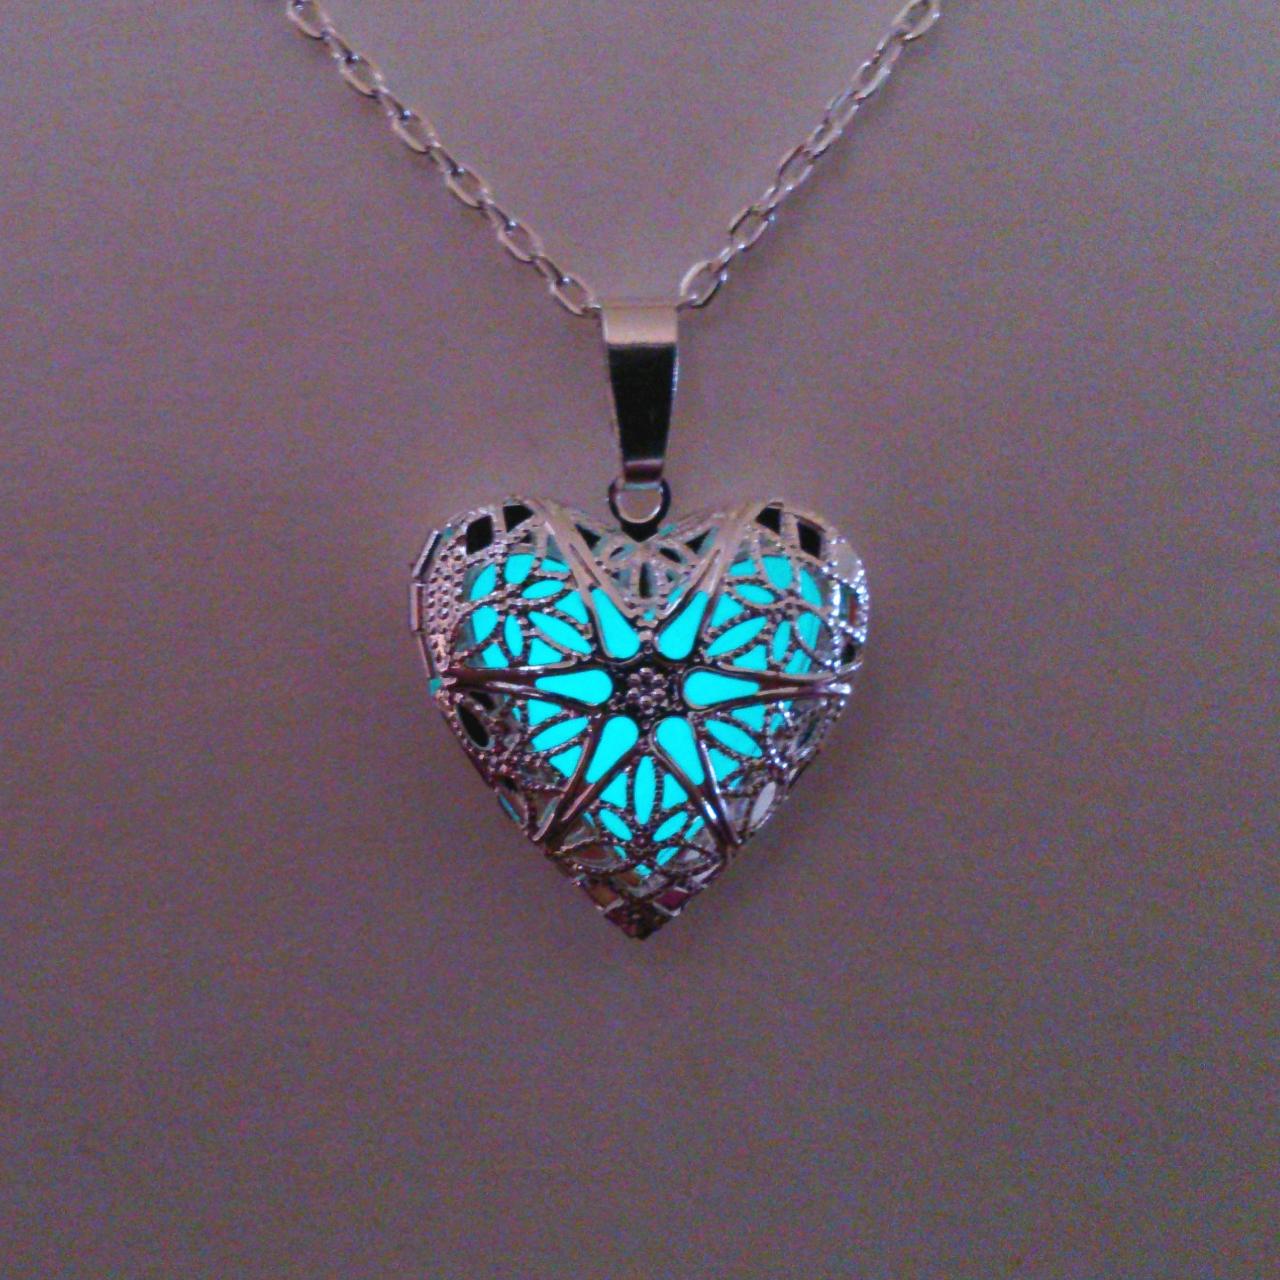 Aqua Glowing Locket Necklace // Glow In The Dark // Glowing Jewelry // Heart Pendant // Filigree Glow Necklace // Gifts For Her // Xmas